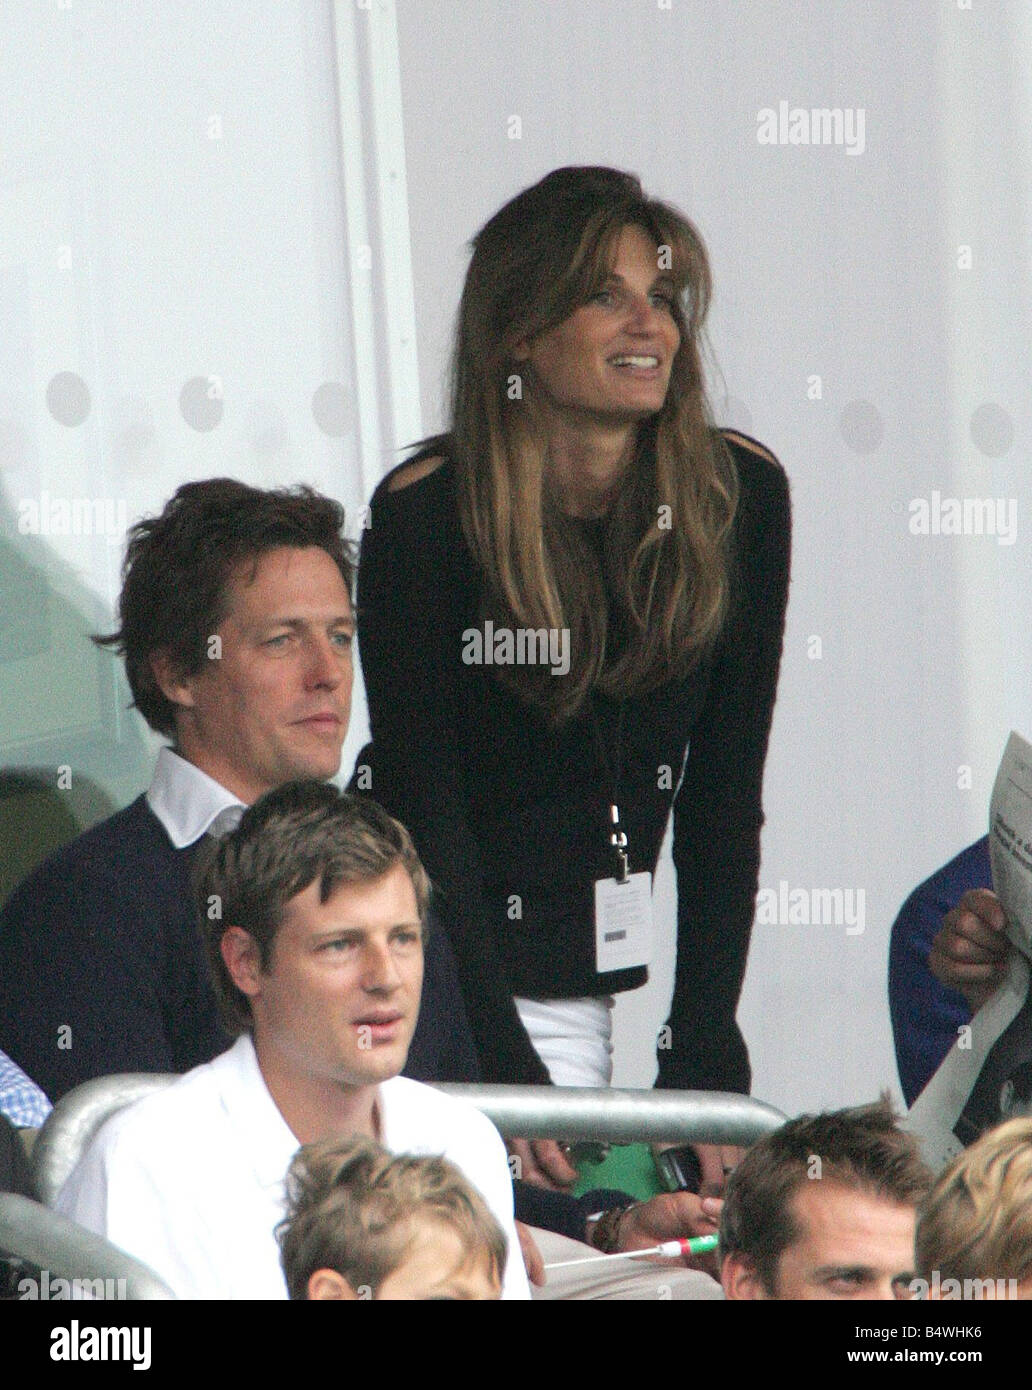 Hugh Grant and Jemima Khan during the England v Australia 5th and final cricket test match at the Oval in South London September 2005 Stock Photo